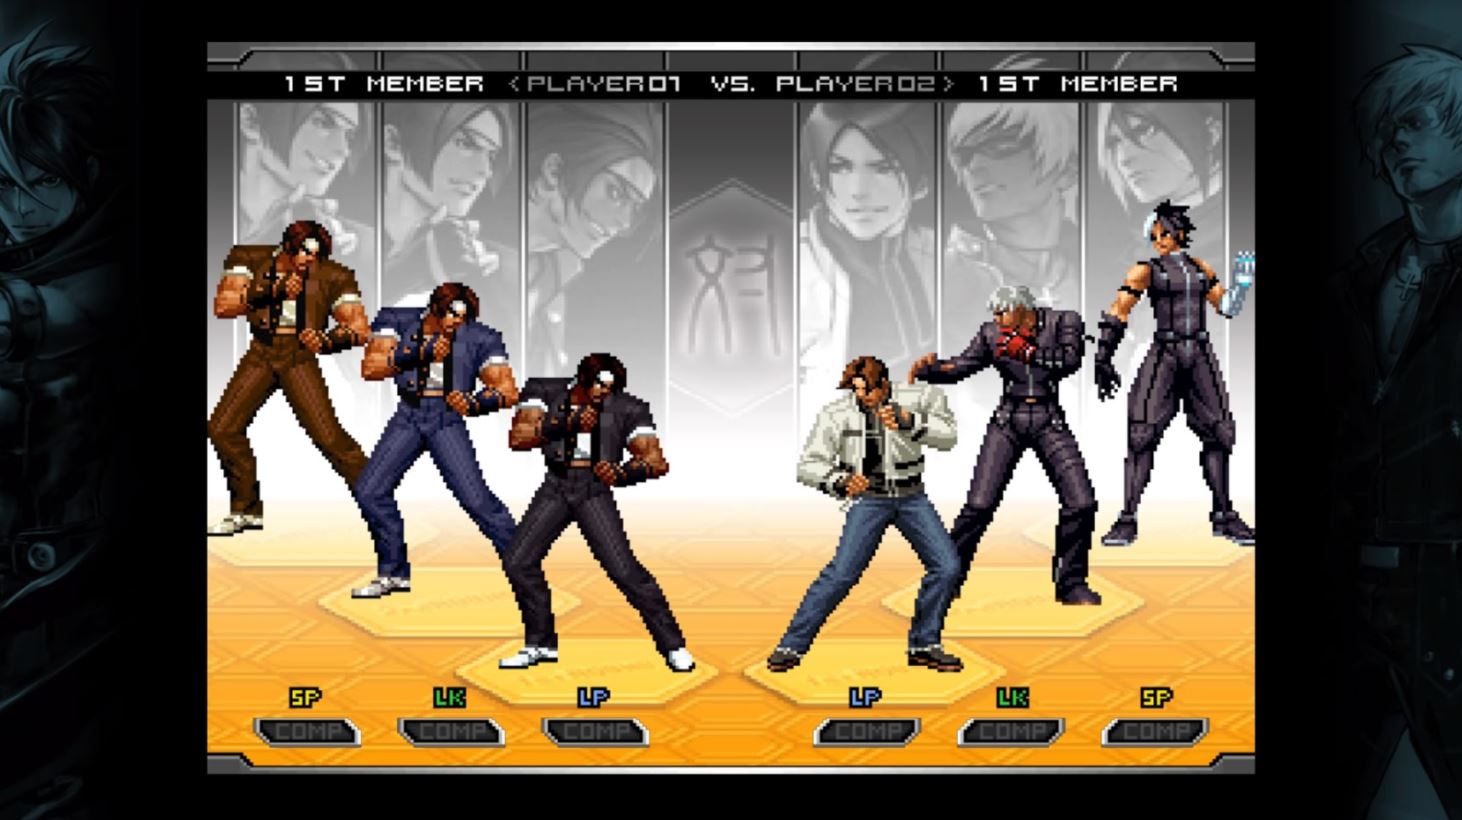 The King Of Fighters 2002 Unlimited Match Out Now On PS4 With